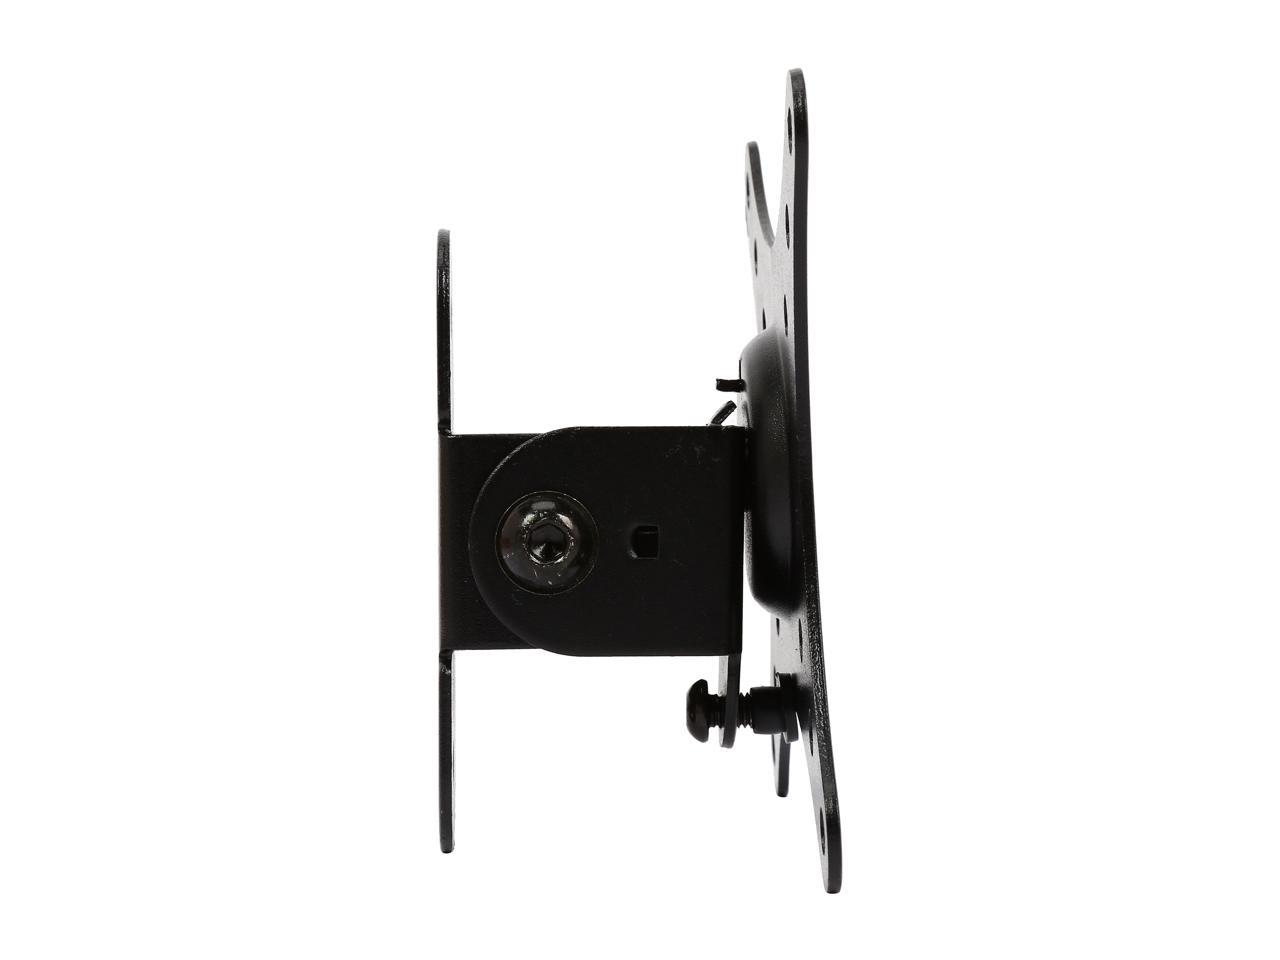 SIIG CE-MT0A12-S1 10"-26" Tilt TV Wall Mount LED & LCD HDTV,up to VESA 100x100 max load 33 lbs,Compatible with Samsung, Vizio, Sony, Panasonic, LG, and Toshiba TV - image 3 of 6